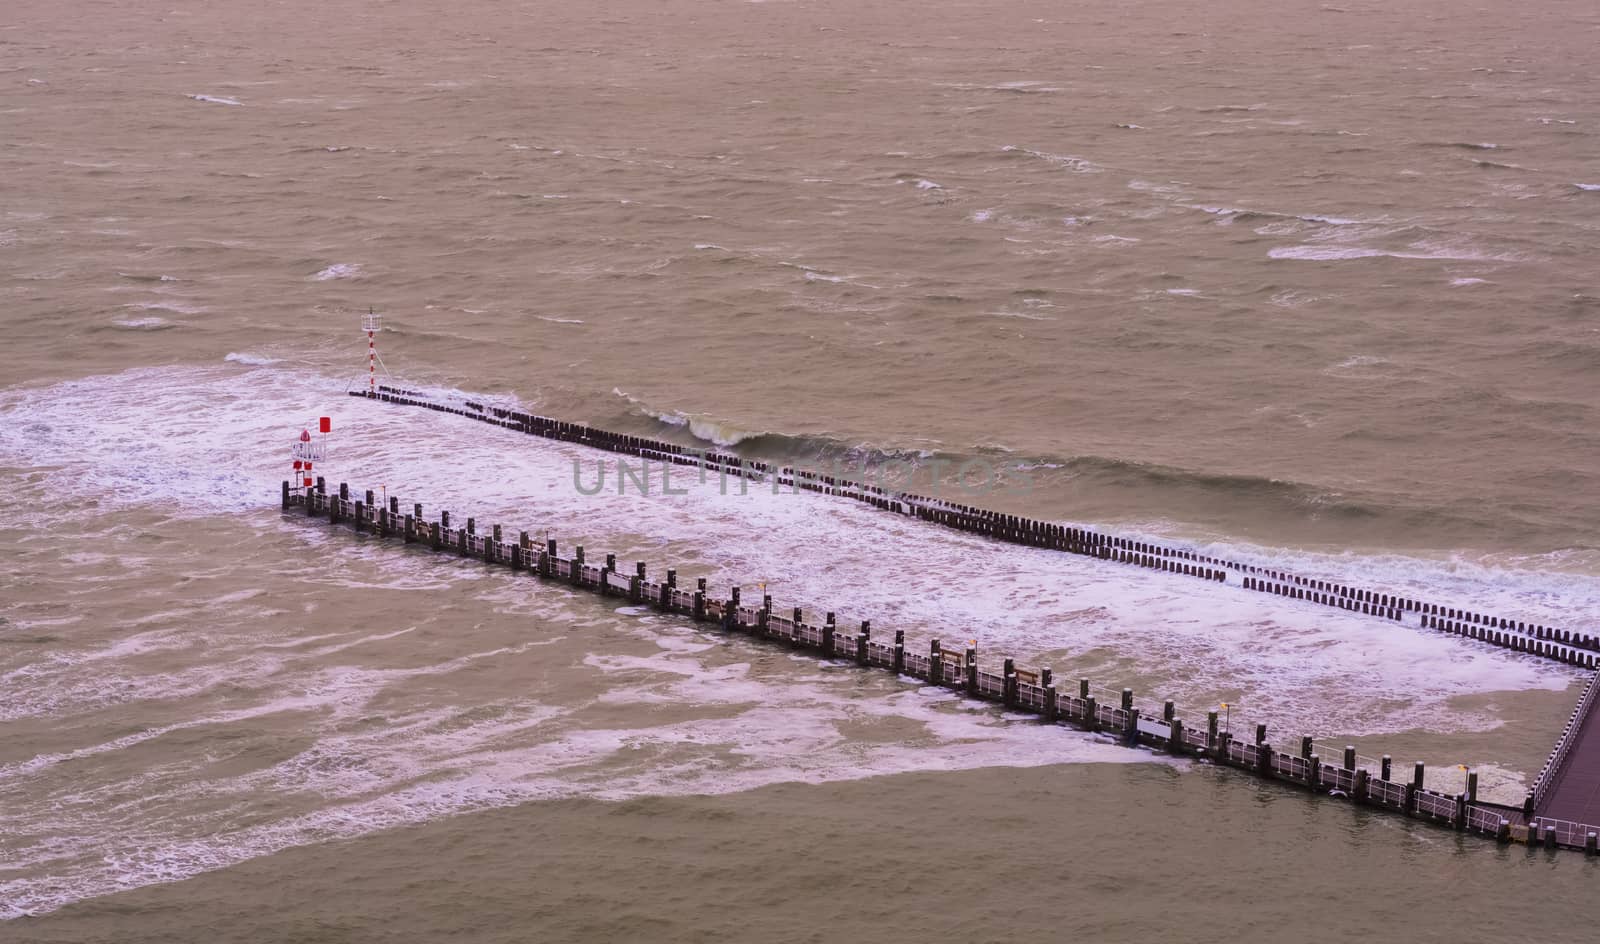 The pier jetty of vlissingen with wooden poles and small lighthouse, wild sea with waves at high tide, Zeeland, The Netherlands